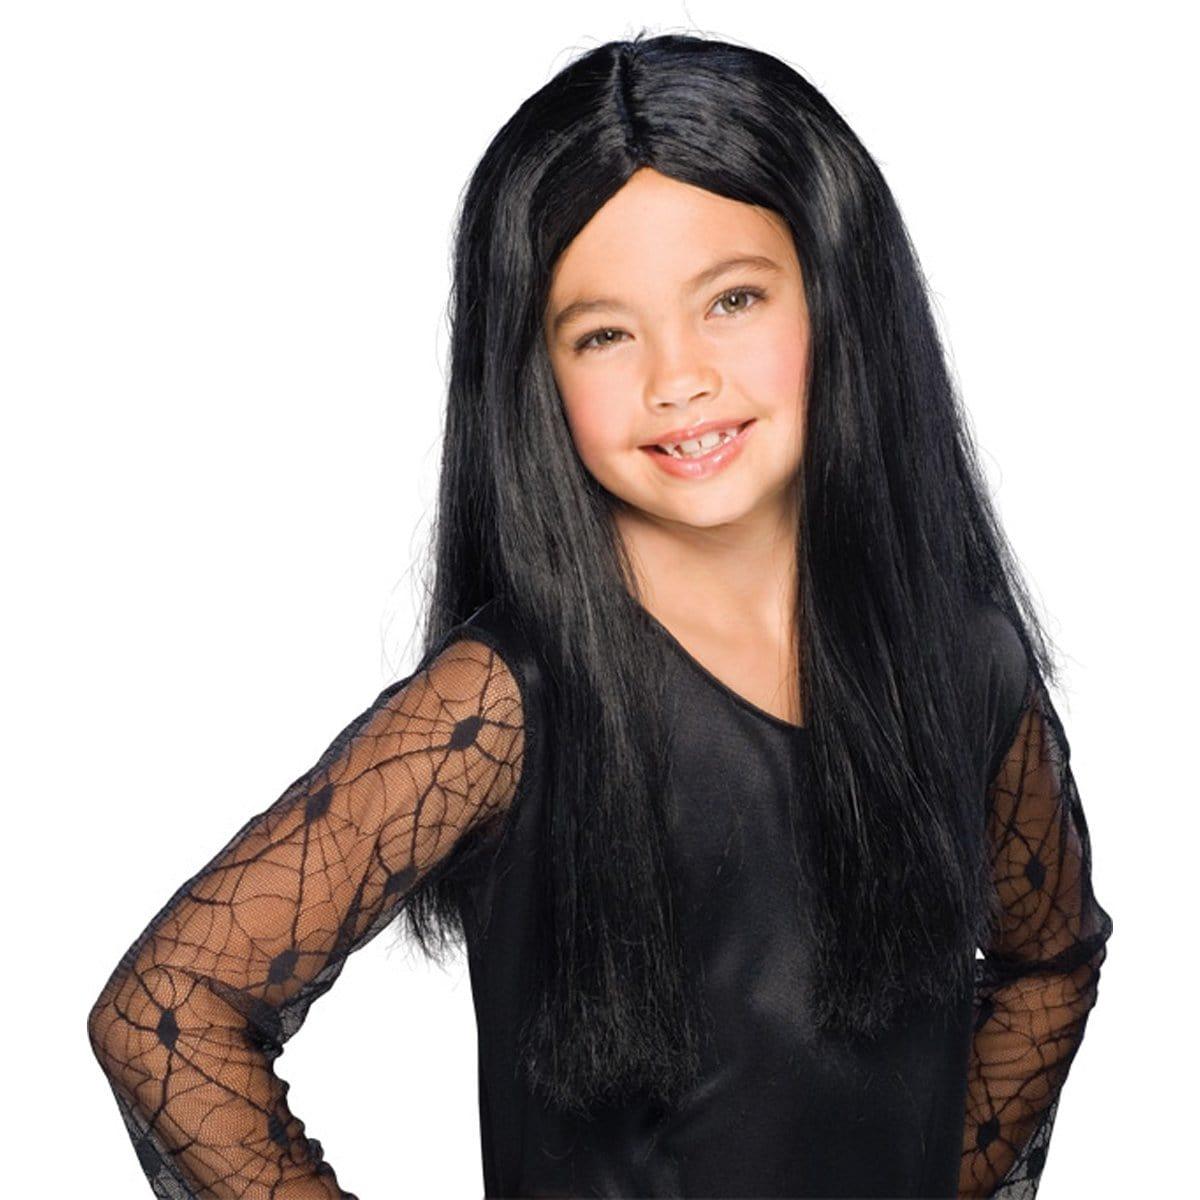 Buy Costume Accessories Black witch wig for girls sold at Party Expert